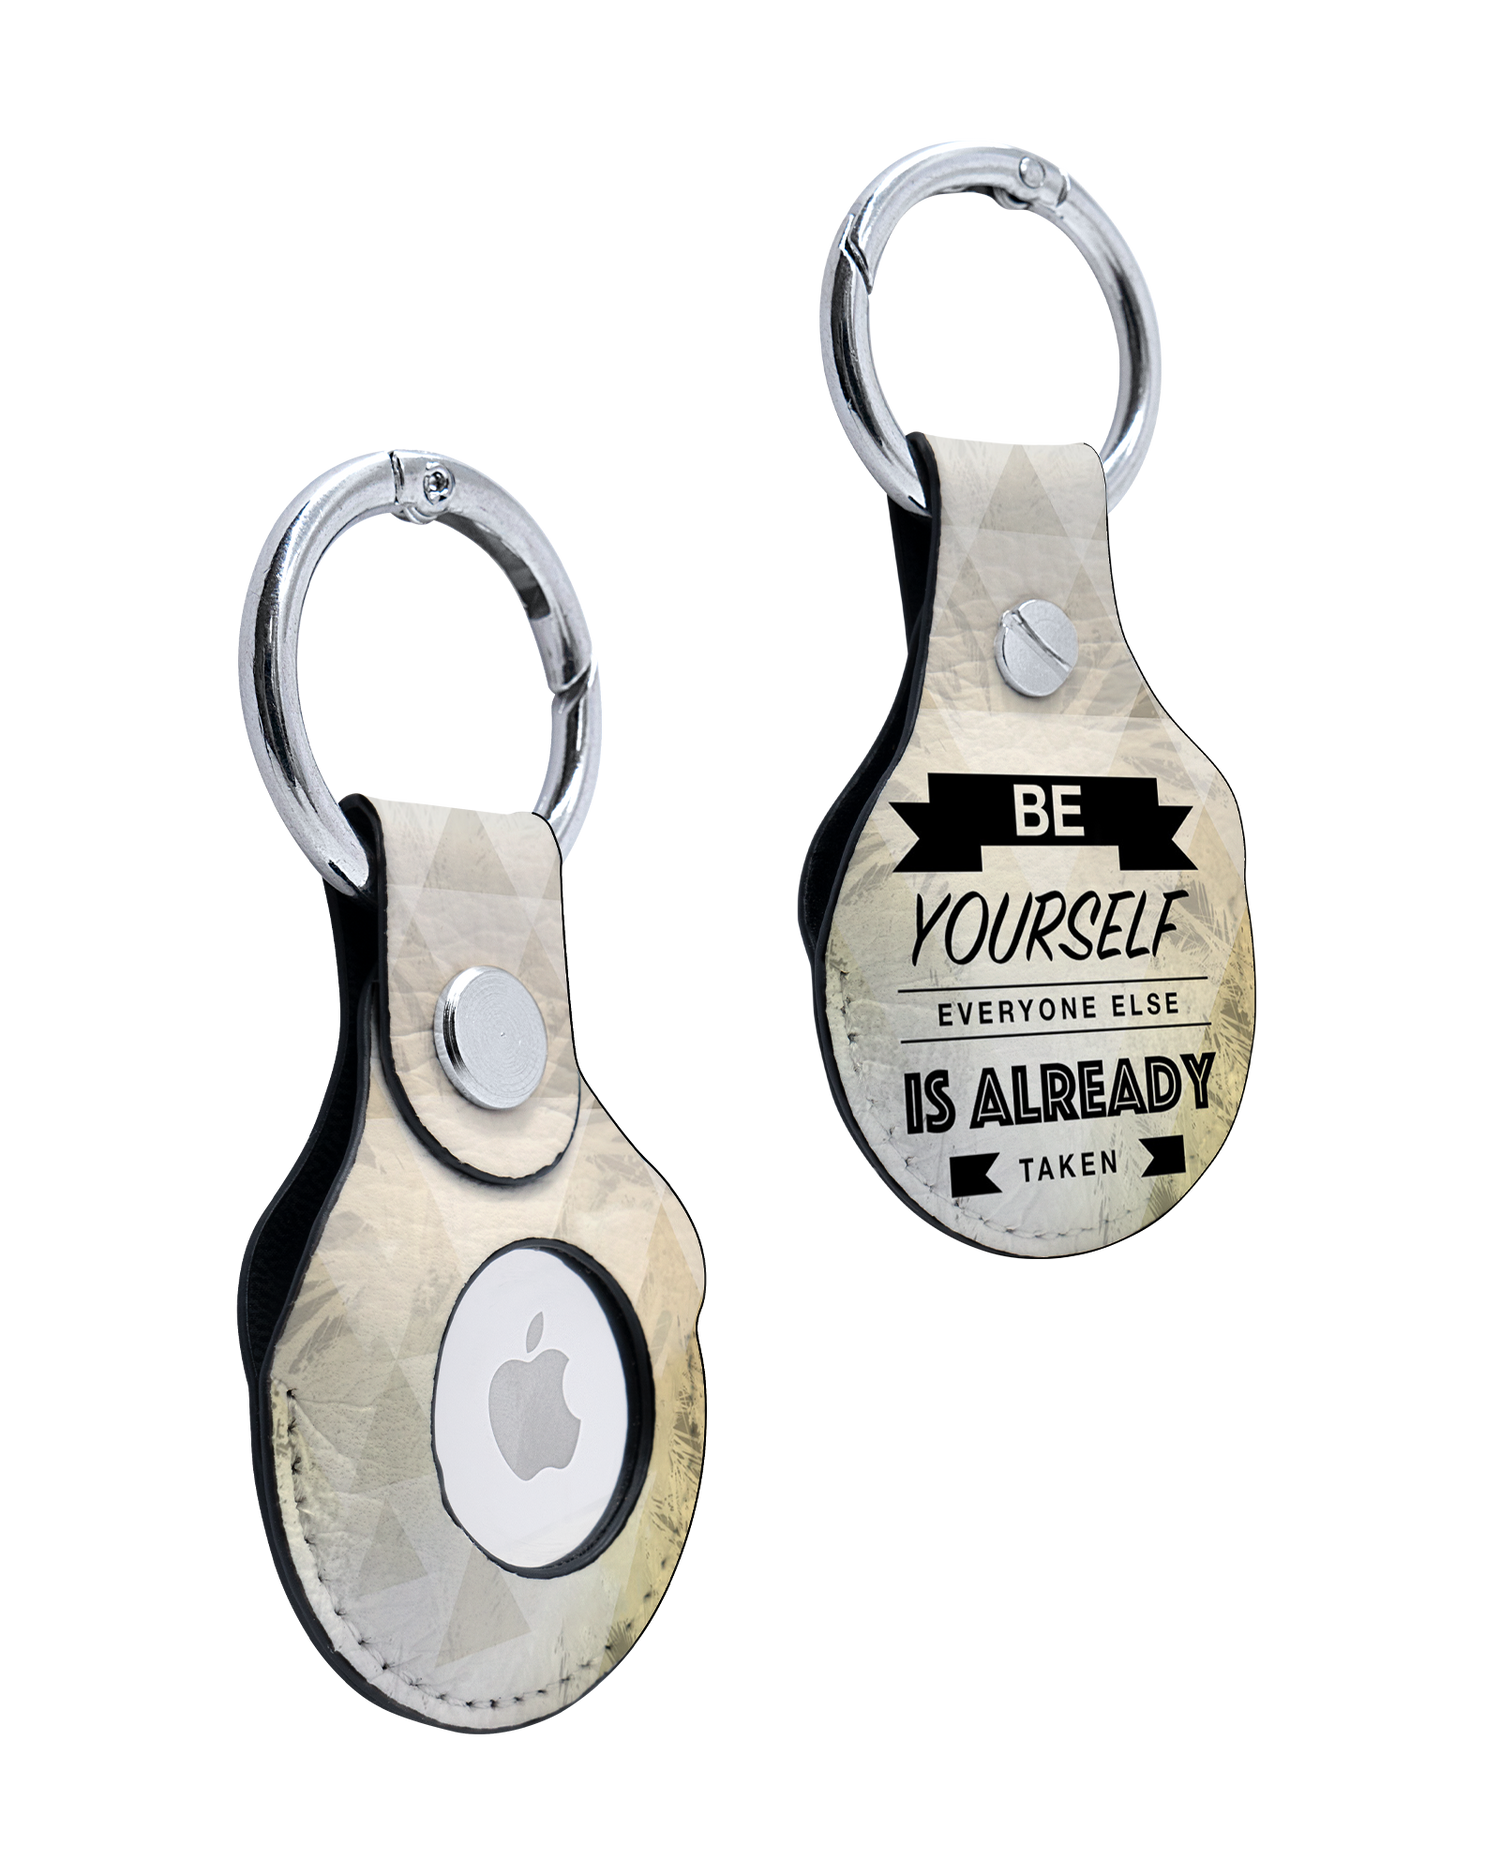 AirTag Holder with Be Yourself Design: Front and Back